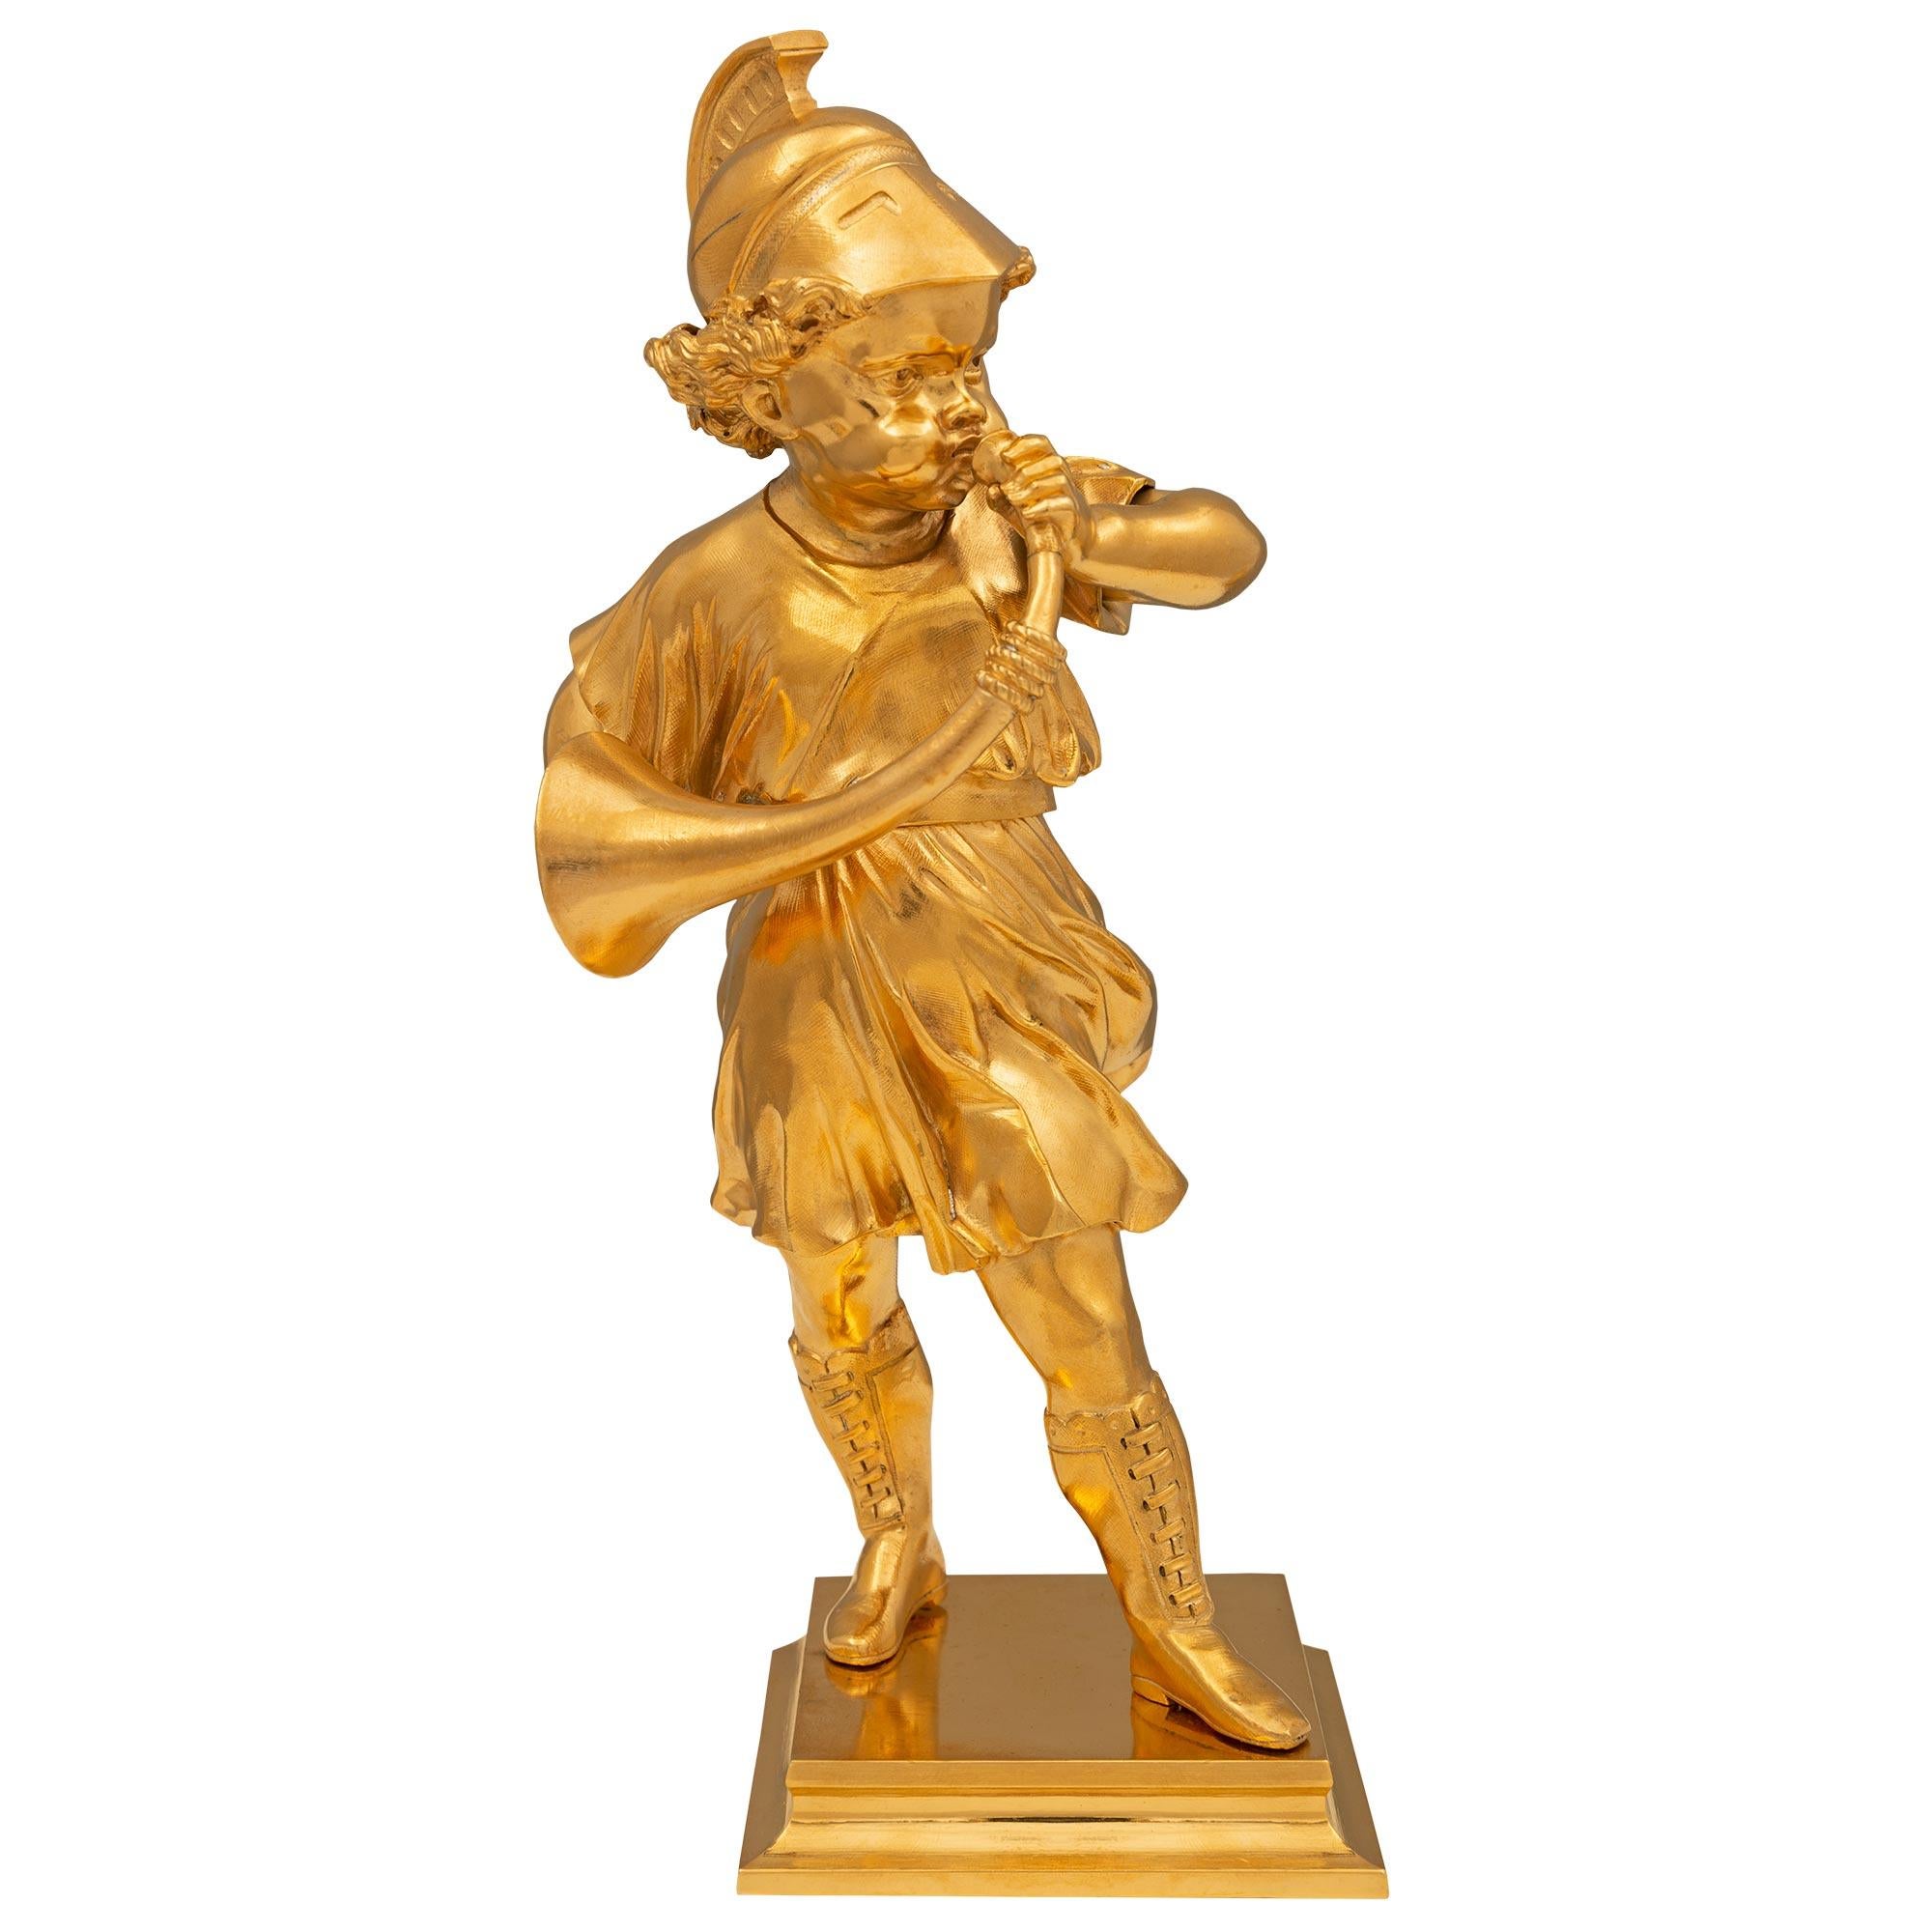 A charming and wonderfully executed French 19th century Louis XVI st. ormolu statue signed Machault. The statue is raised by a square base with an elegant mottled border where the signature is displayed. Above is the young boy wearing boots while